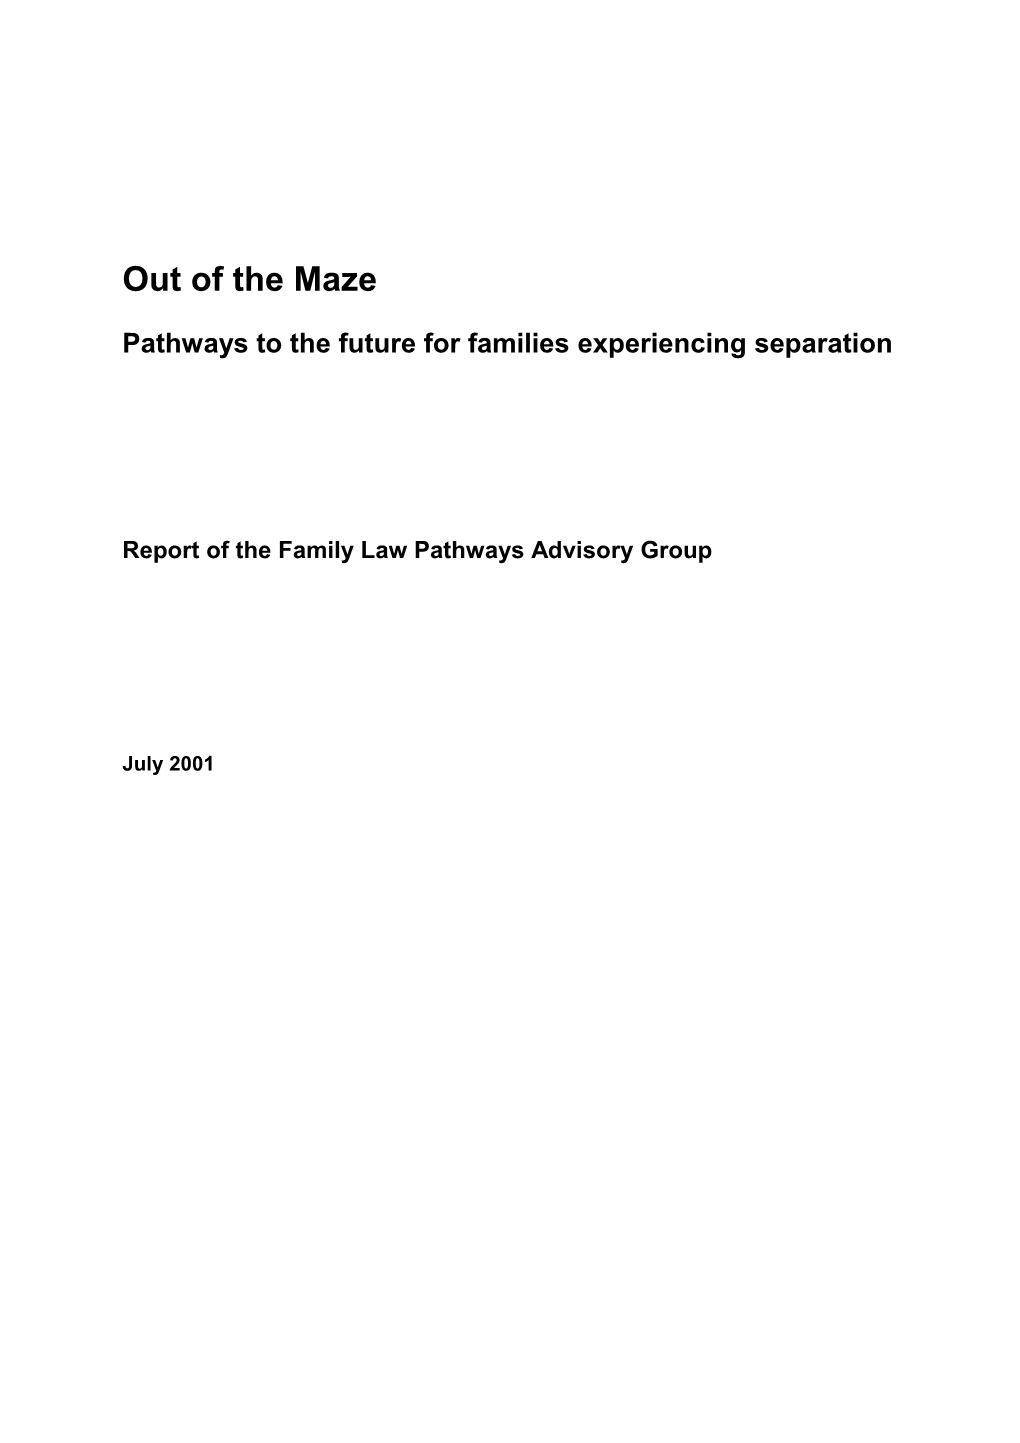 Out of the Maze Report